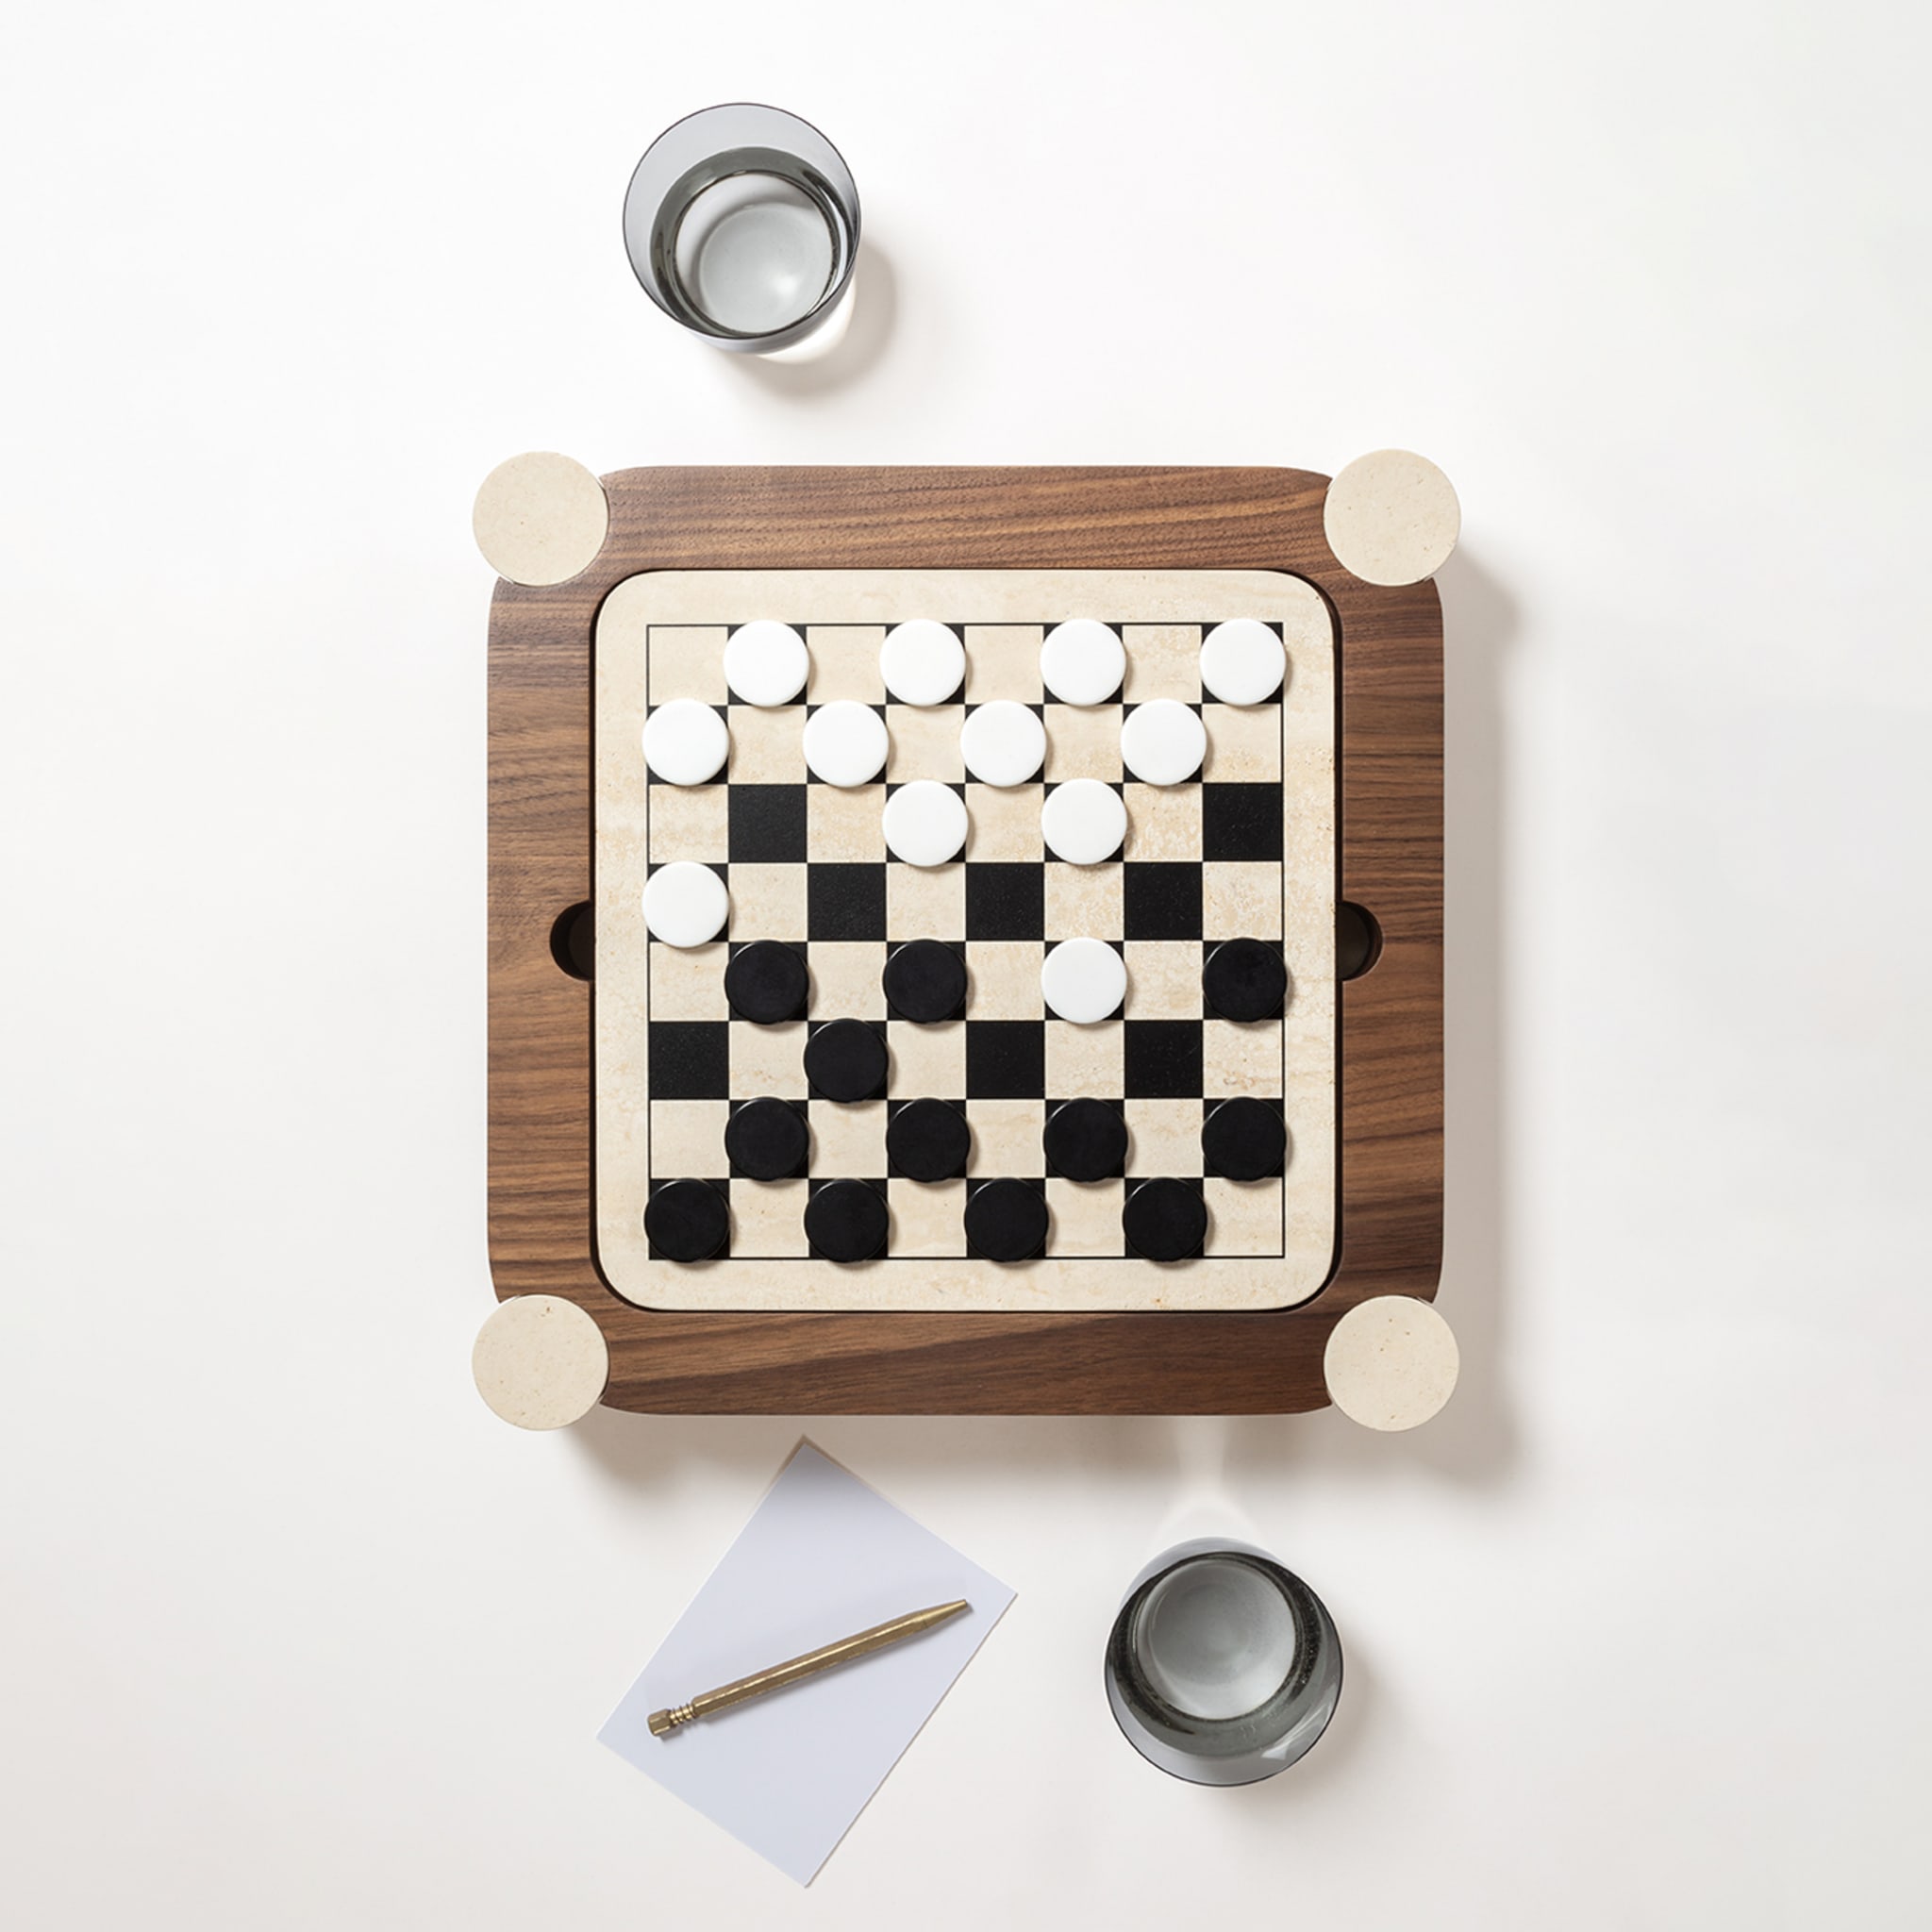 Mocambo Chess Draughts Game Set Design by Simone Fanciullacci - Alternative view 4